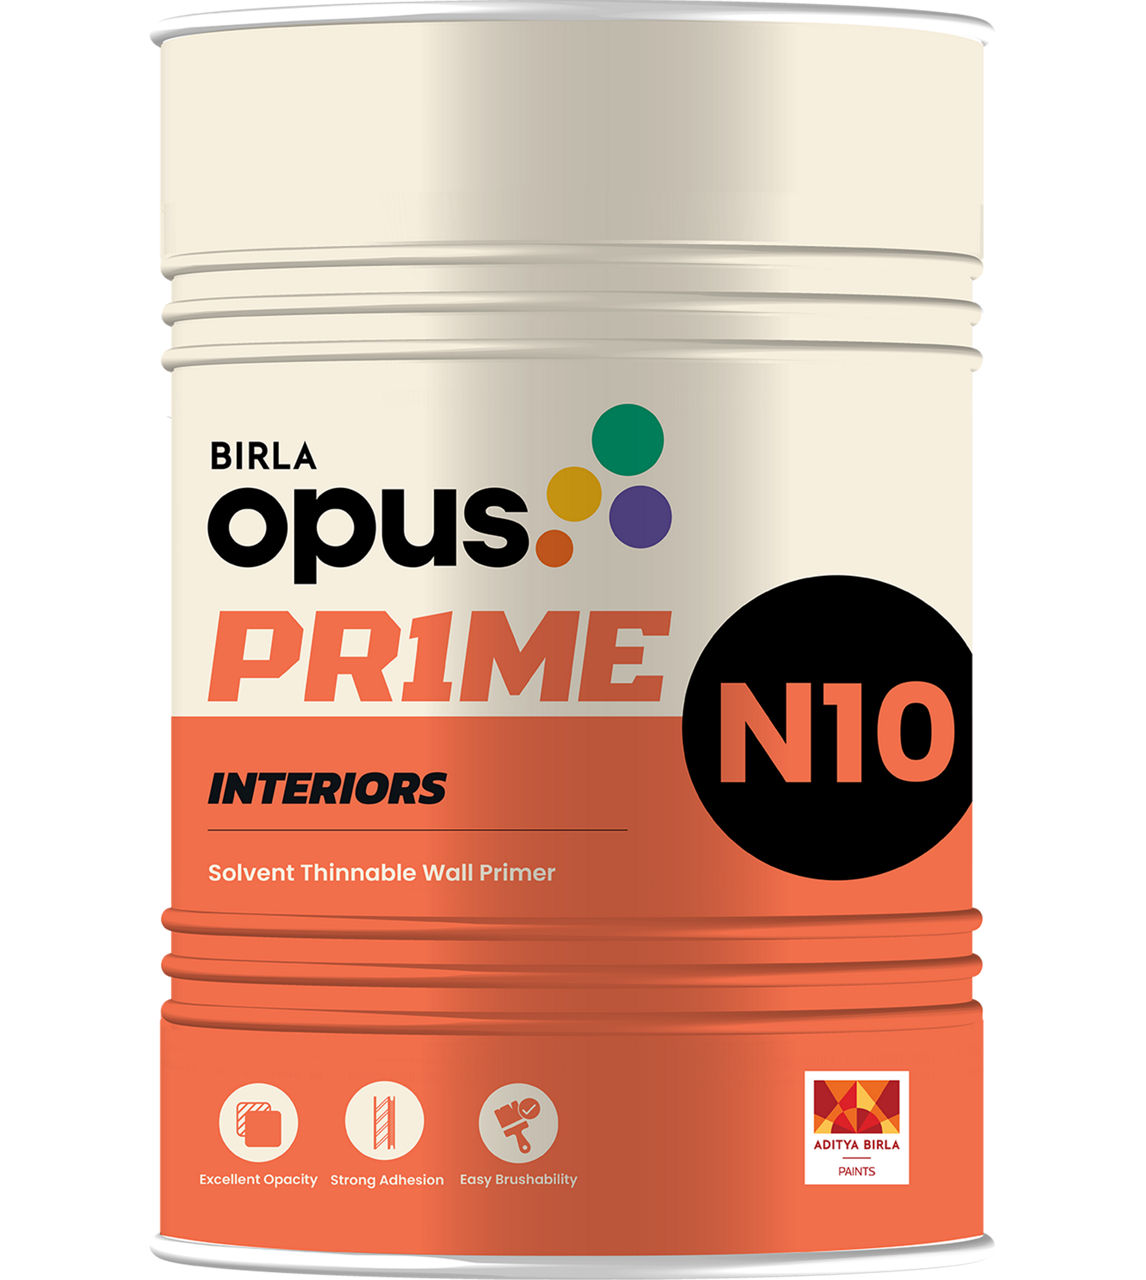 N10 Interior Solvent Thinnable Wall Primer